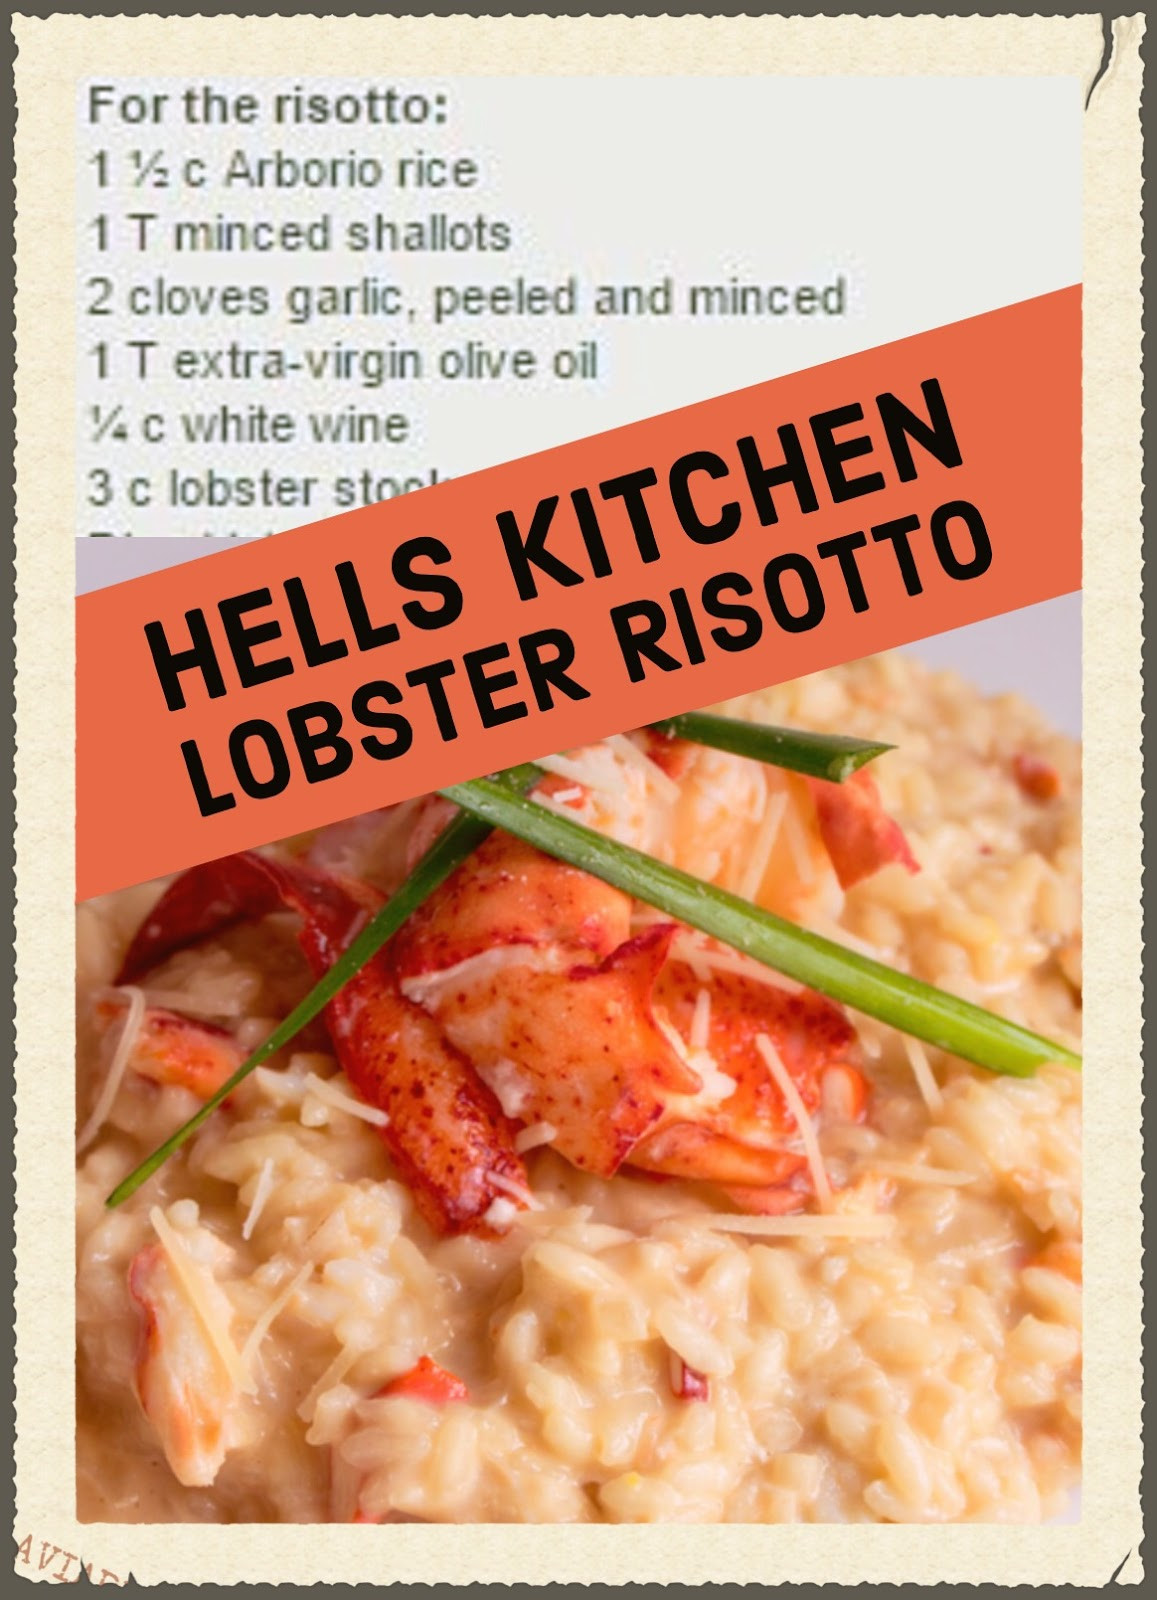 Seafood Risotto Gordon Ramsay
 Yum Yum for Dum Dum Hells Kitchen Lobster Risotto vs Bret